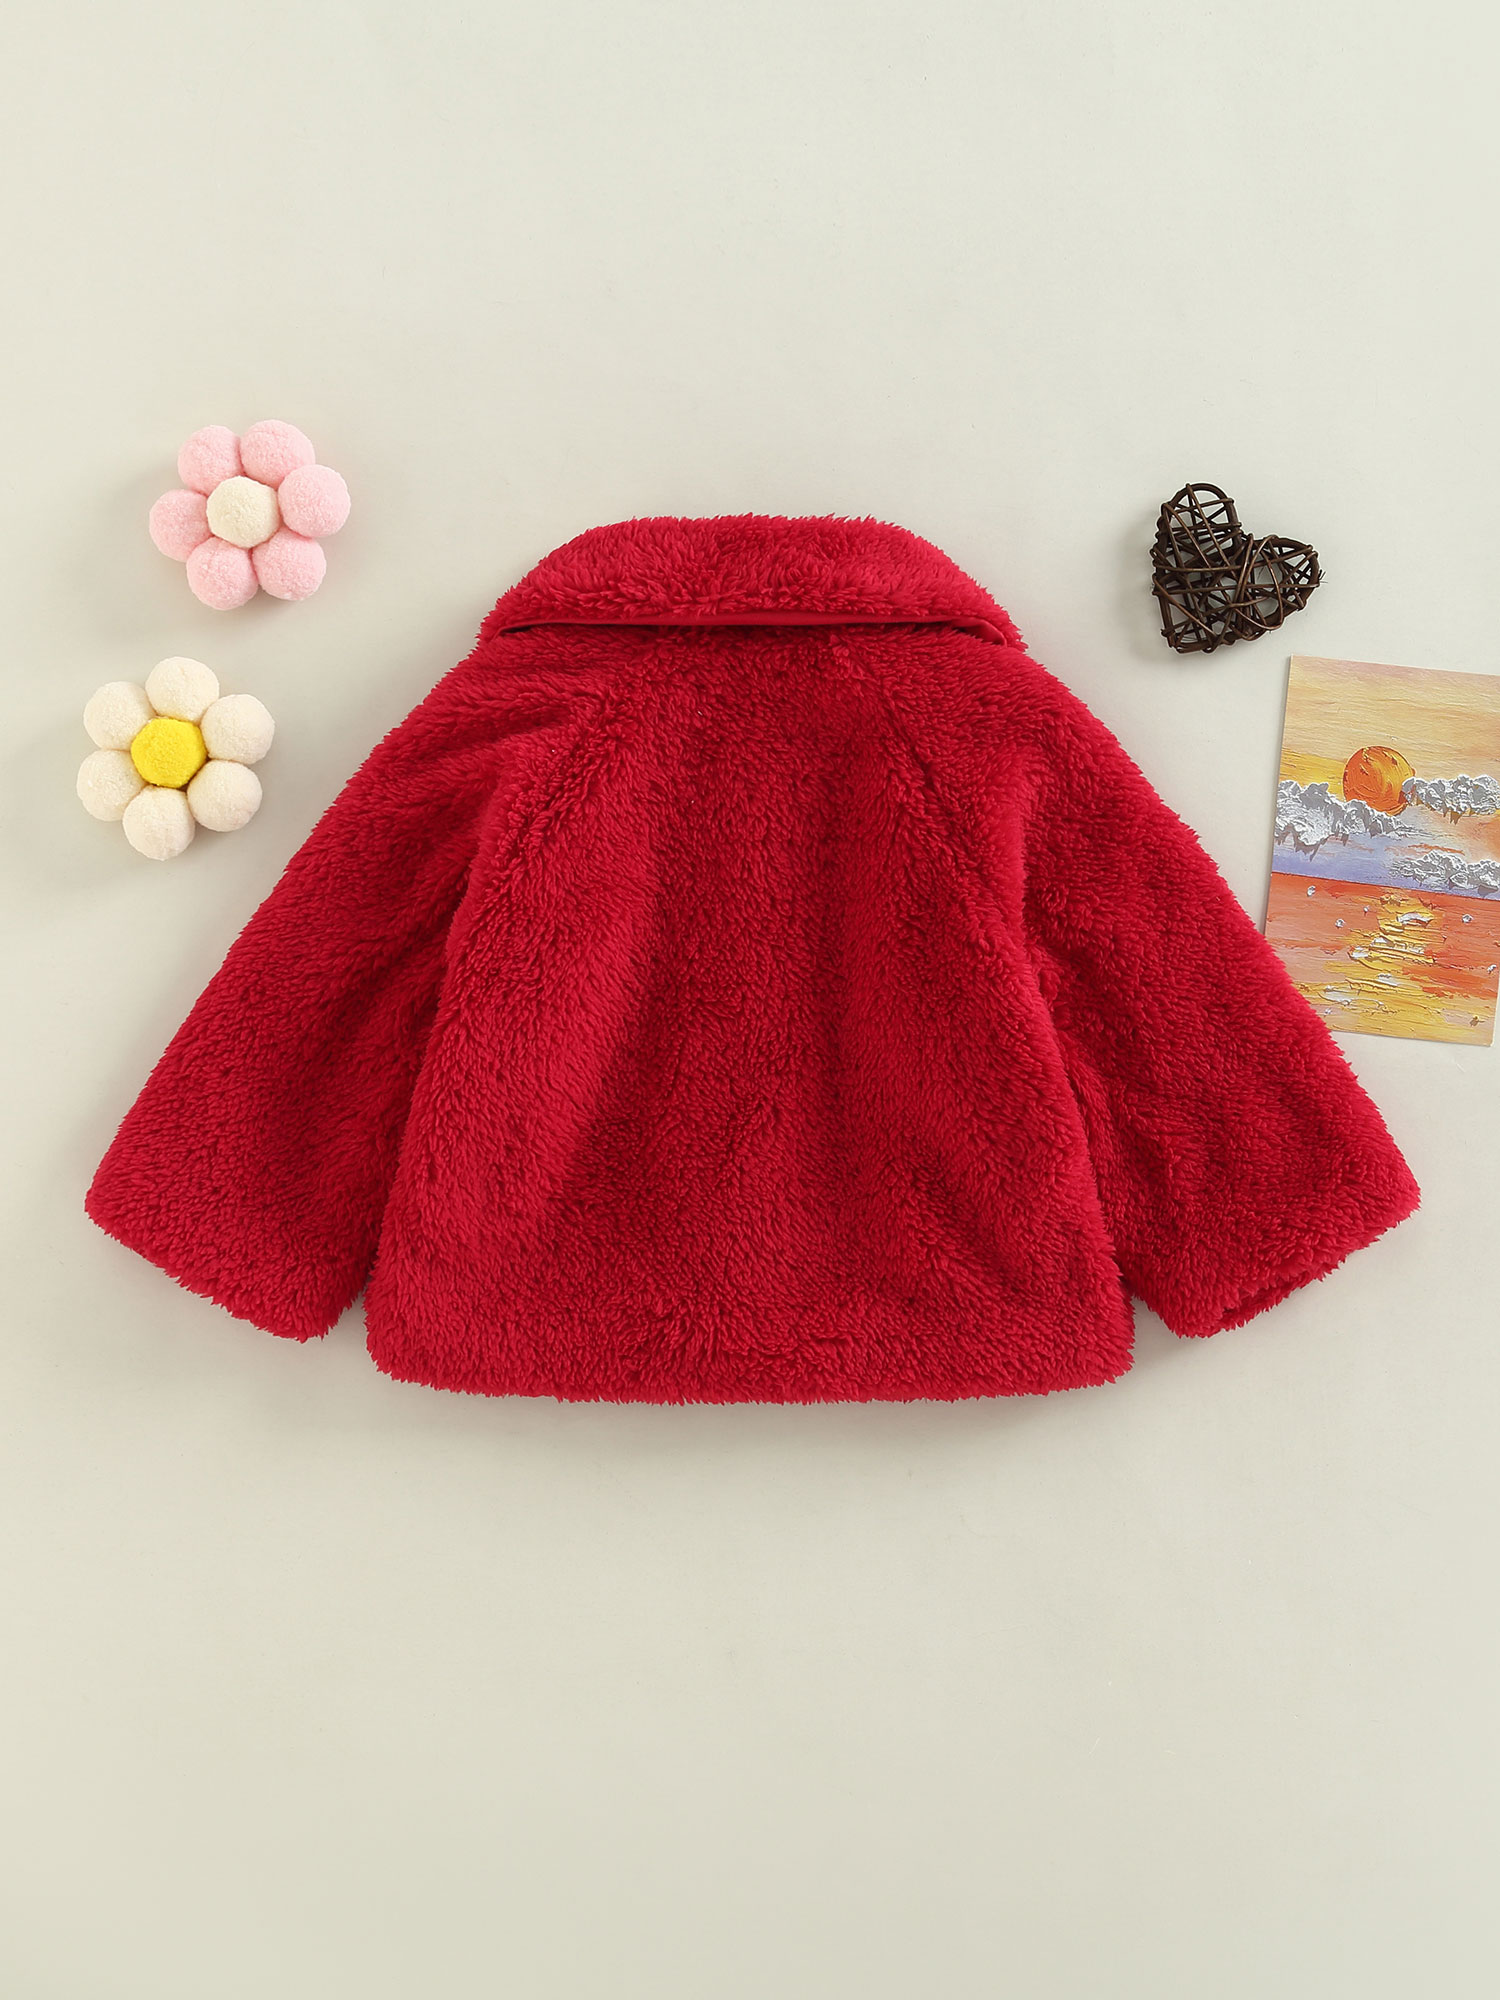 Licupiee Infant Newborn Baby Girl Plush Coat Warm Lapel Long Sleeve Button Down Red Plush Jacket Fall Winter Outwear - image 3 of 6